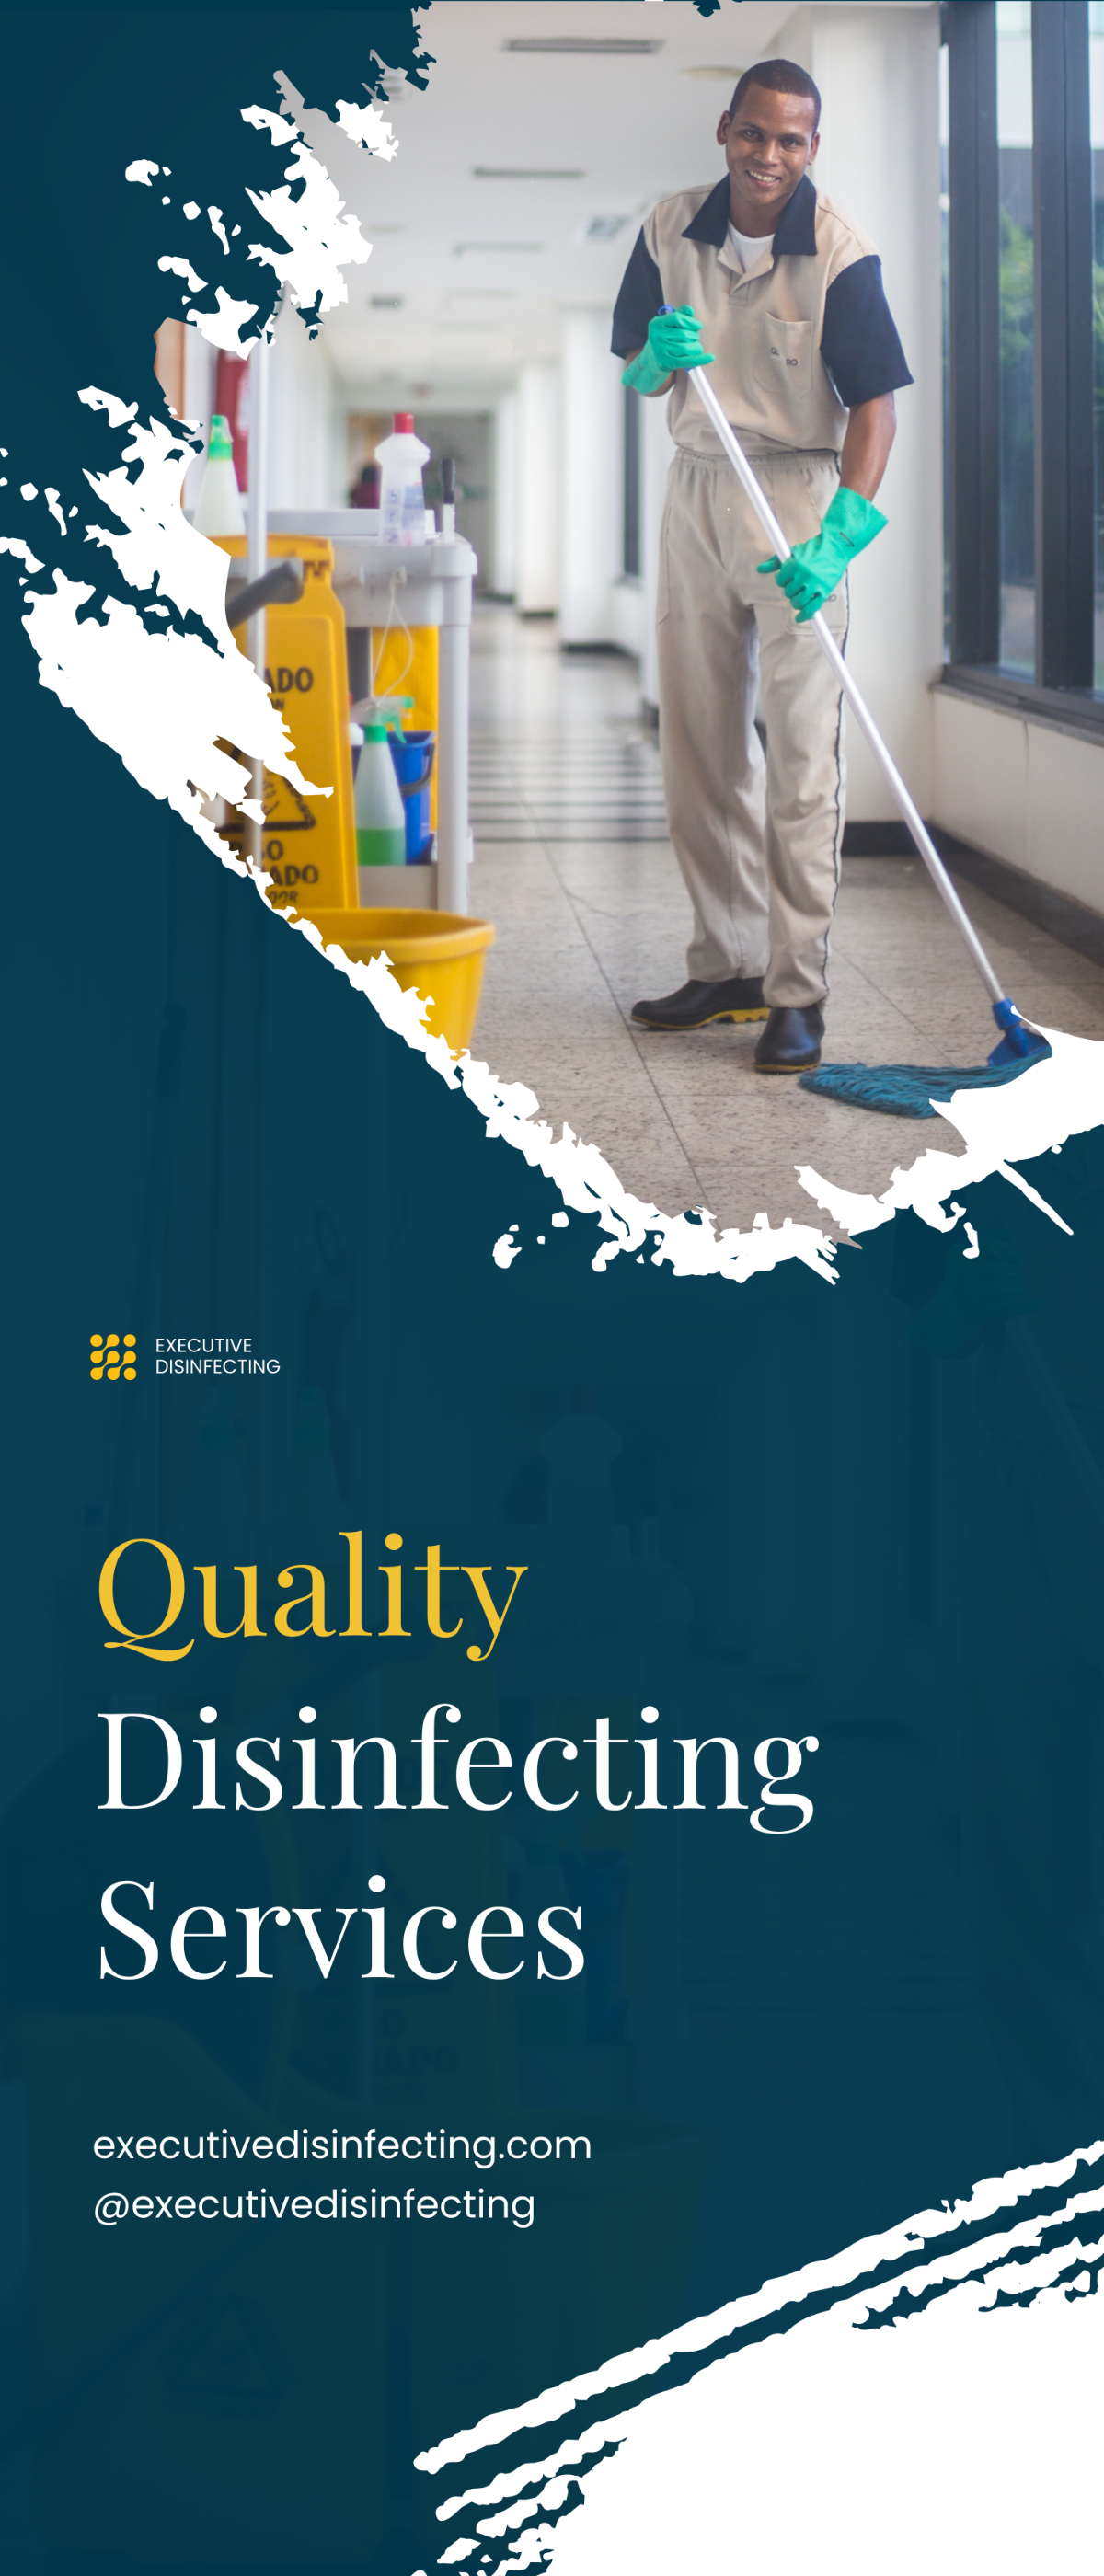 Professional Disinfecting Services Roll Up Banner Template